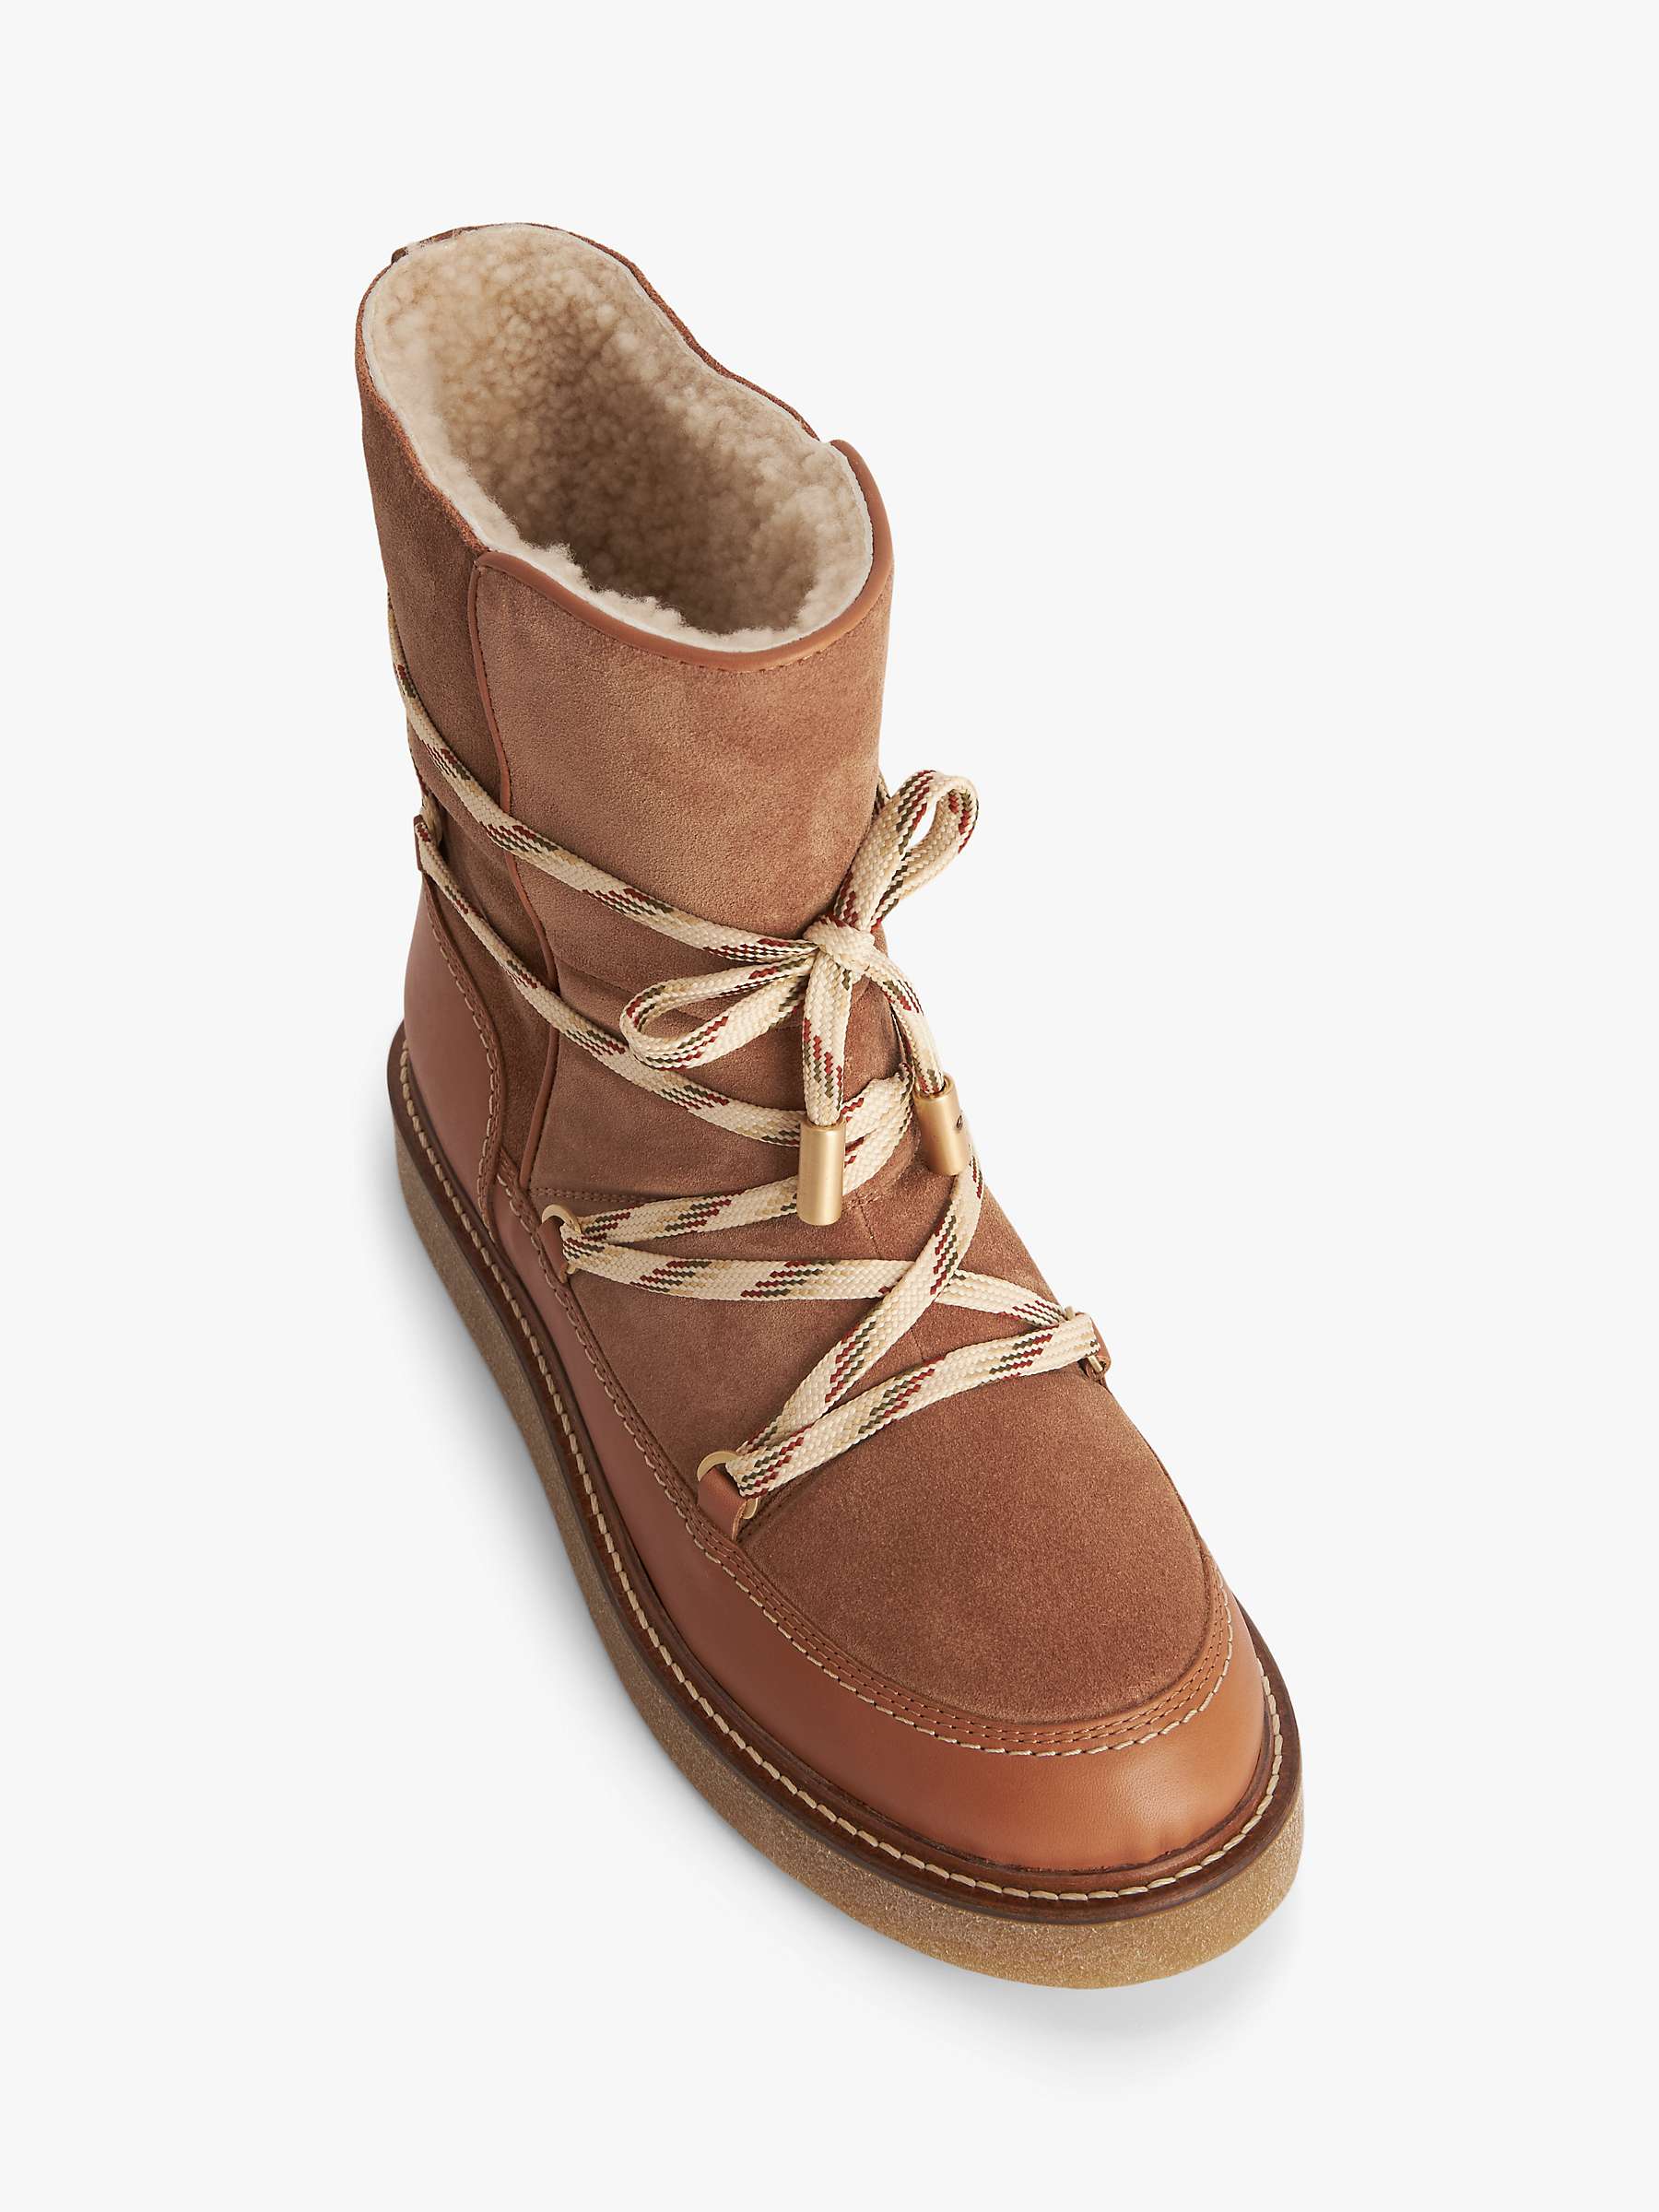 Buy AND/OR Pilot Leather/Suede Lace Up Crepe Sole Snow Boots, Brown/Tan Online at johnlewis.com